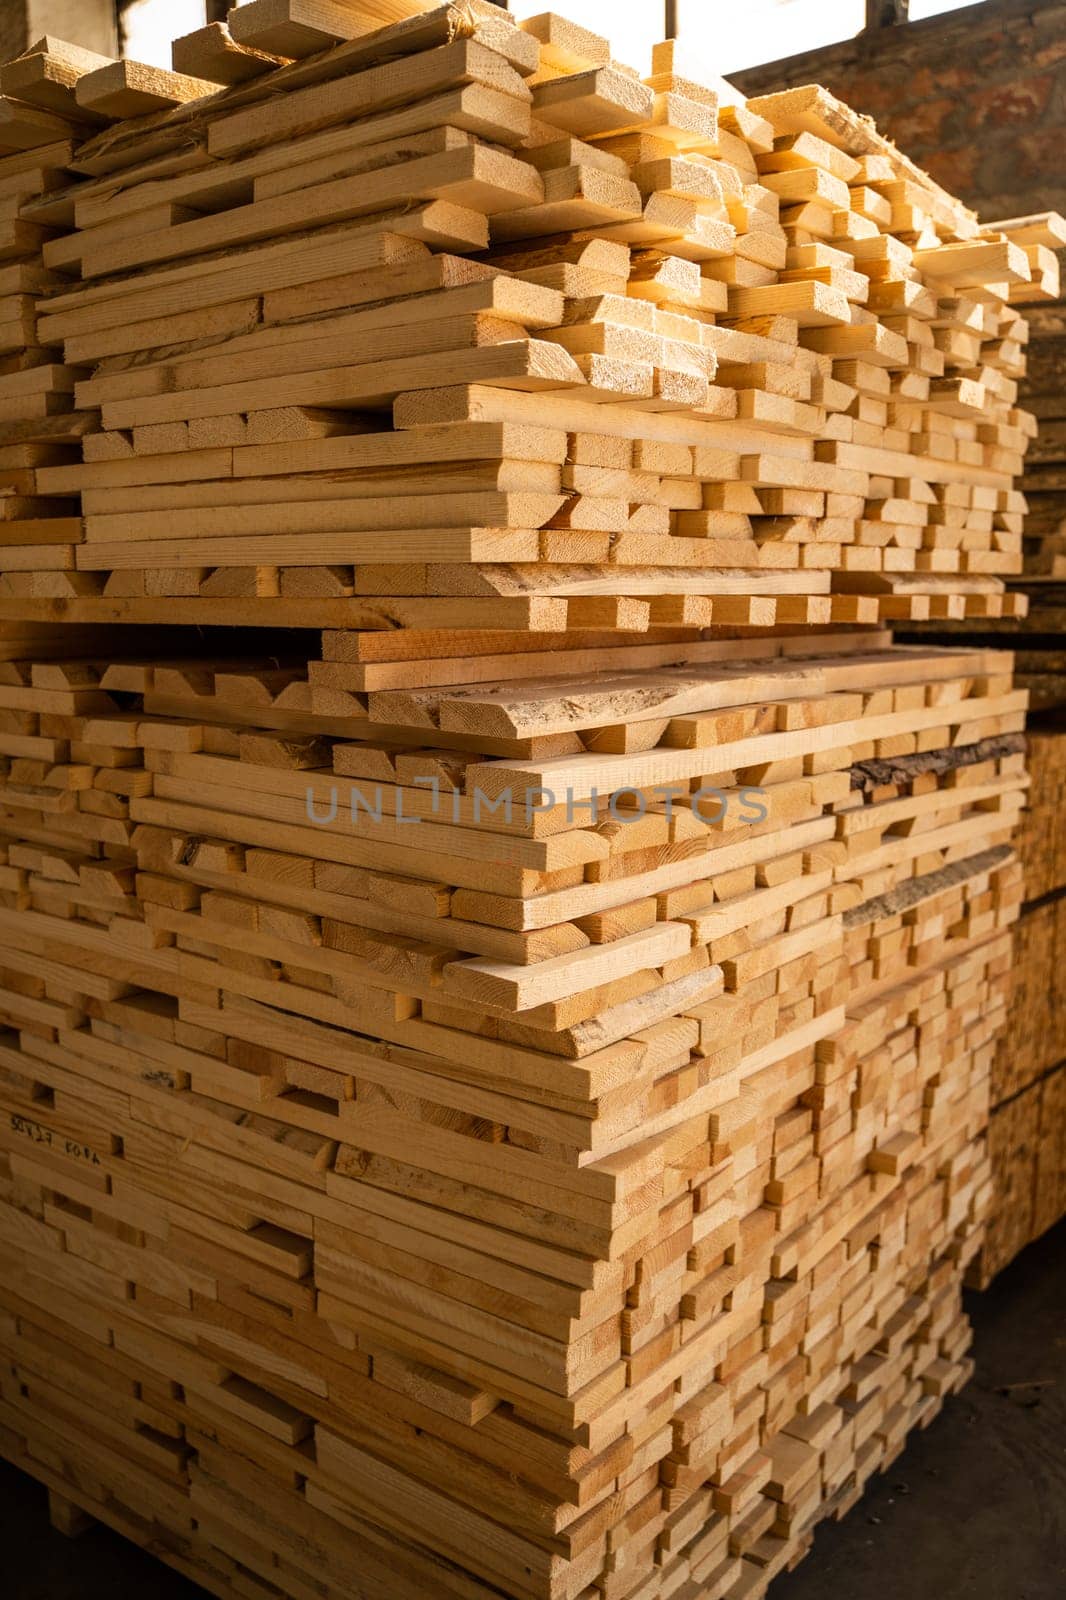 Stacked wooden planks. Hardware store or construction site. Wood for house construction. Building material. Wood warehouse. Wood industry. by vovsht